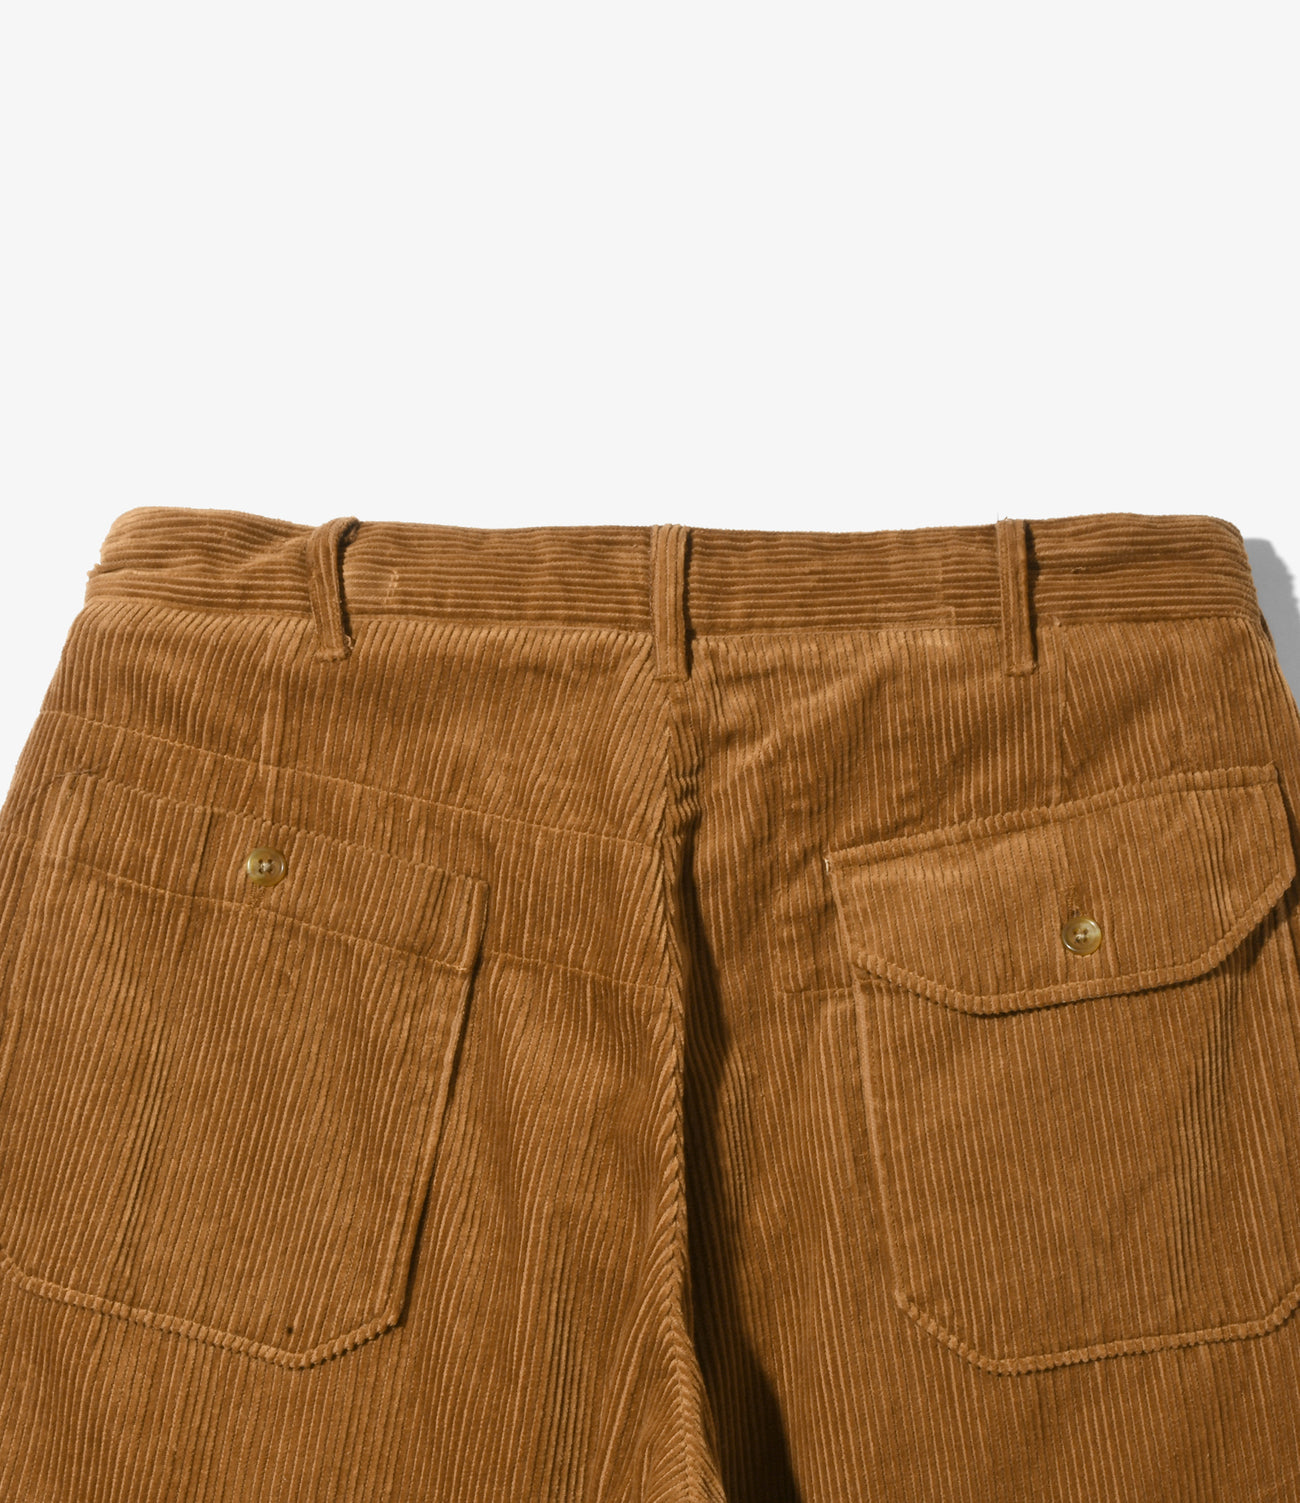 Engineered Garments CARLYLE PANT - COTTON 8W CORDUROY – unexpected